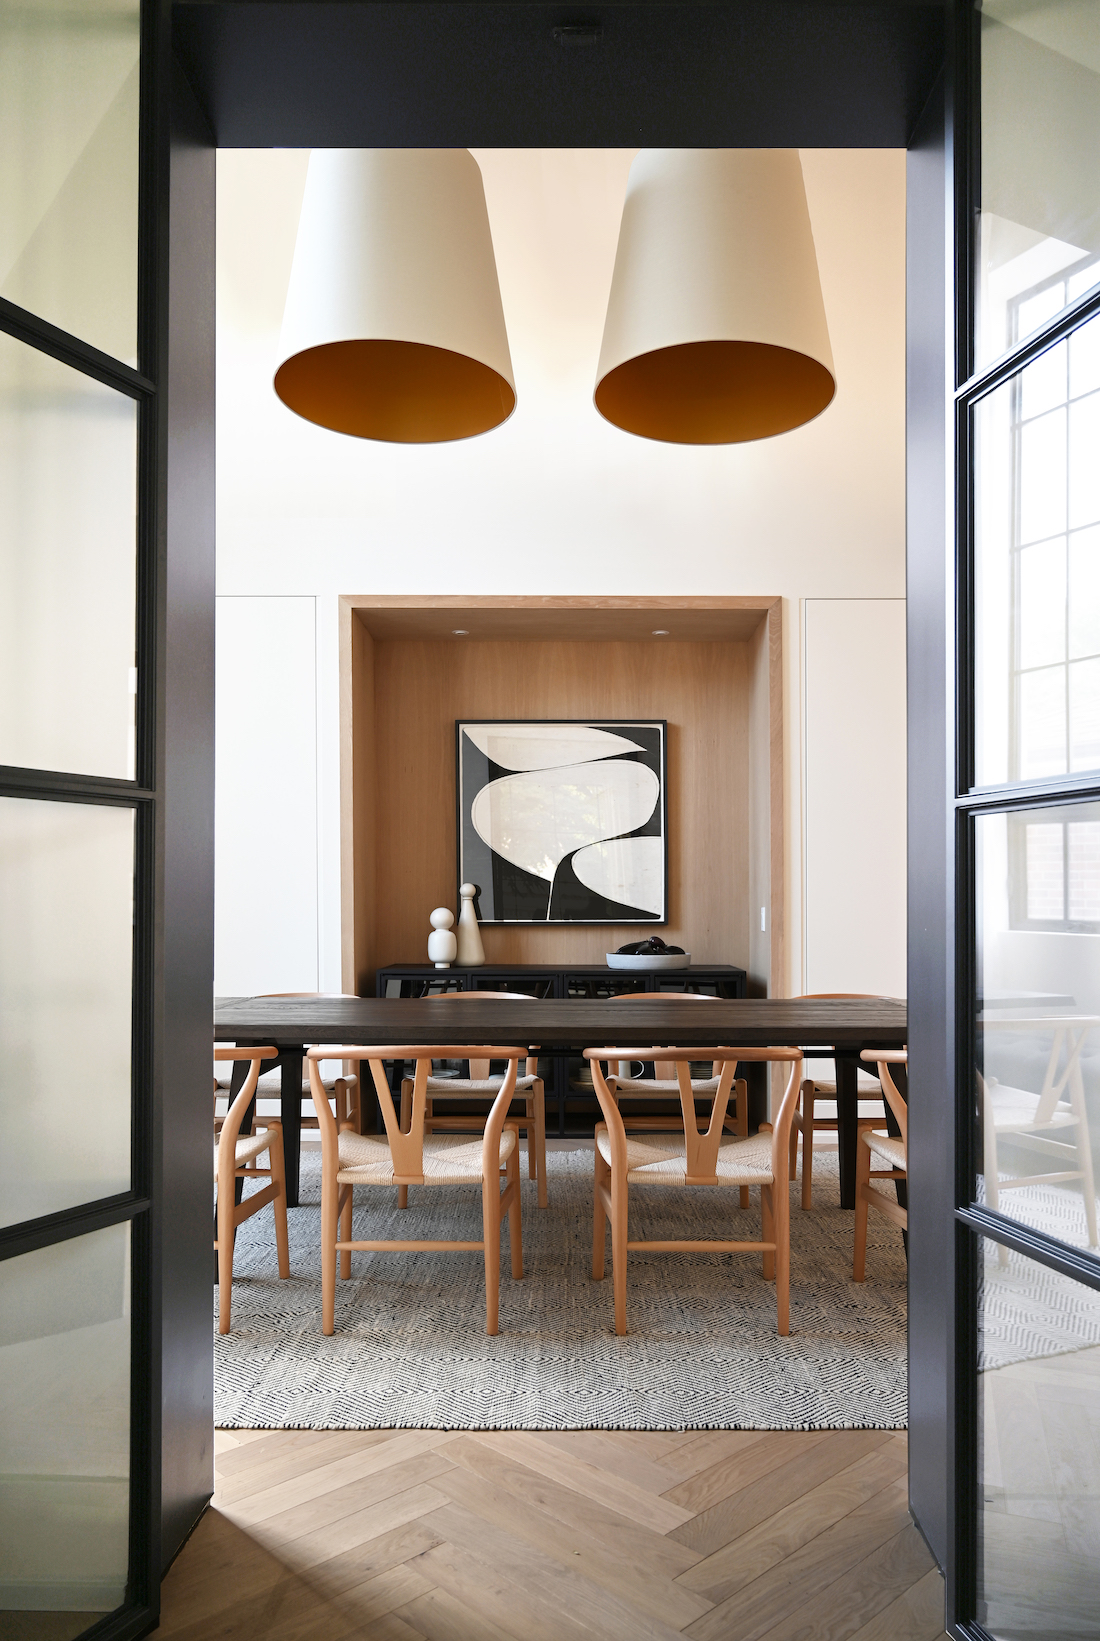 Dining table with oversized pendant lights